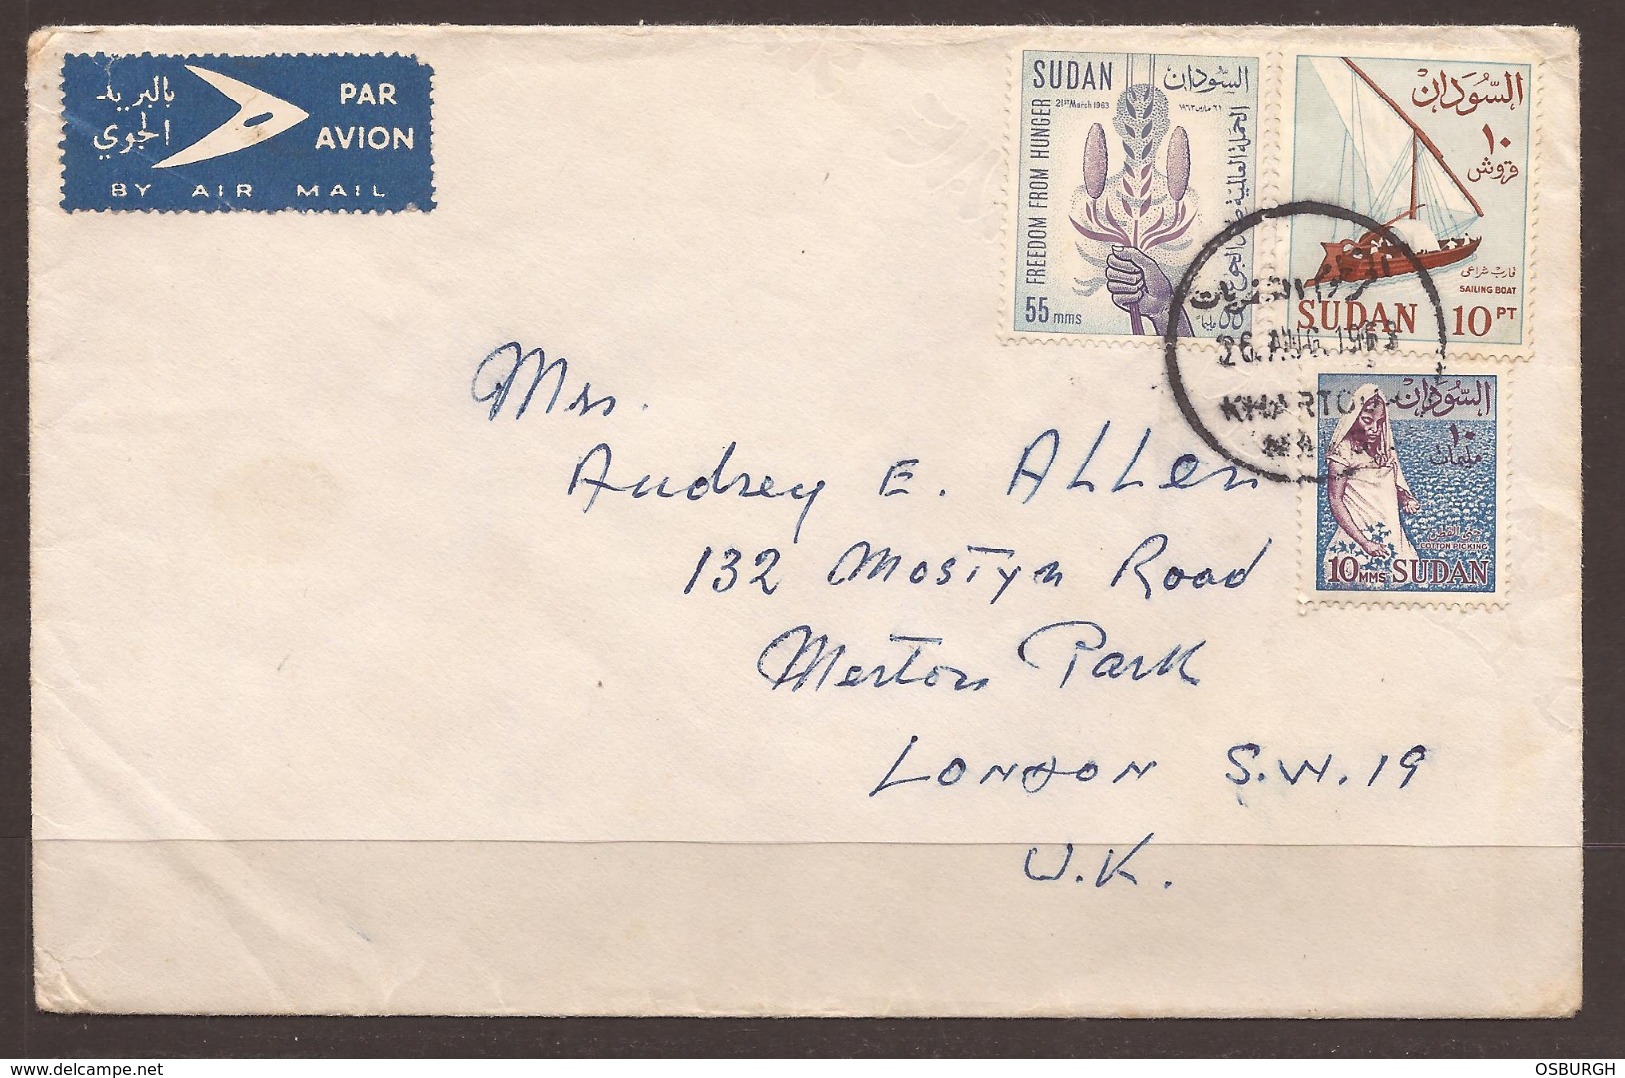 SUDAN. 1963. AIR MAIL COVER. FREEDOM FROM HUNGER AND DEFINATIVES. - Sudan (1954-...)